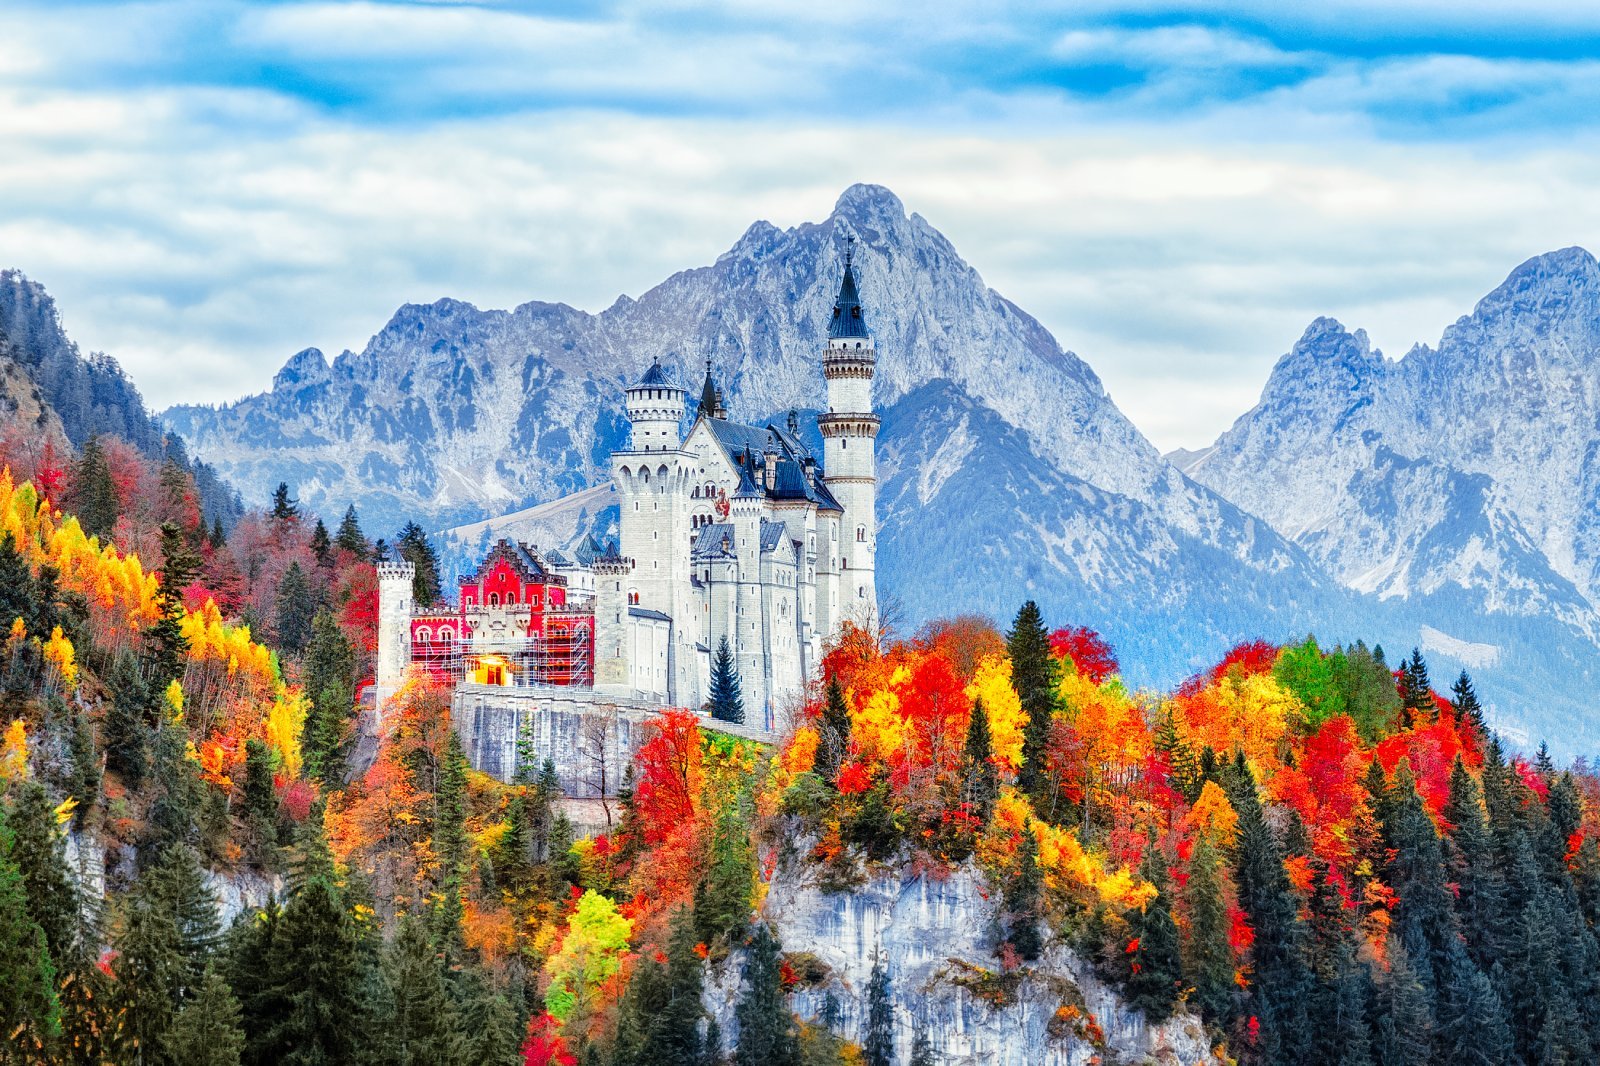 <p class="wp-caption-text">Image Credit: Shutterstock / Feel good studio</p>  <p><span>Straight out of a fairytale, Neuschwanstein Castle perches atop a rugged hill, boasting enchanting turrets, secret passages, and panoramic views of the Bavarian Alps.</span></p>